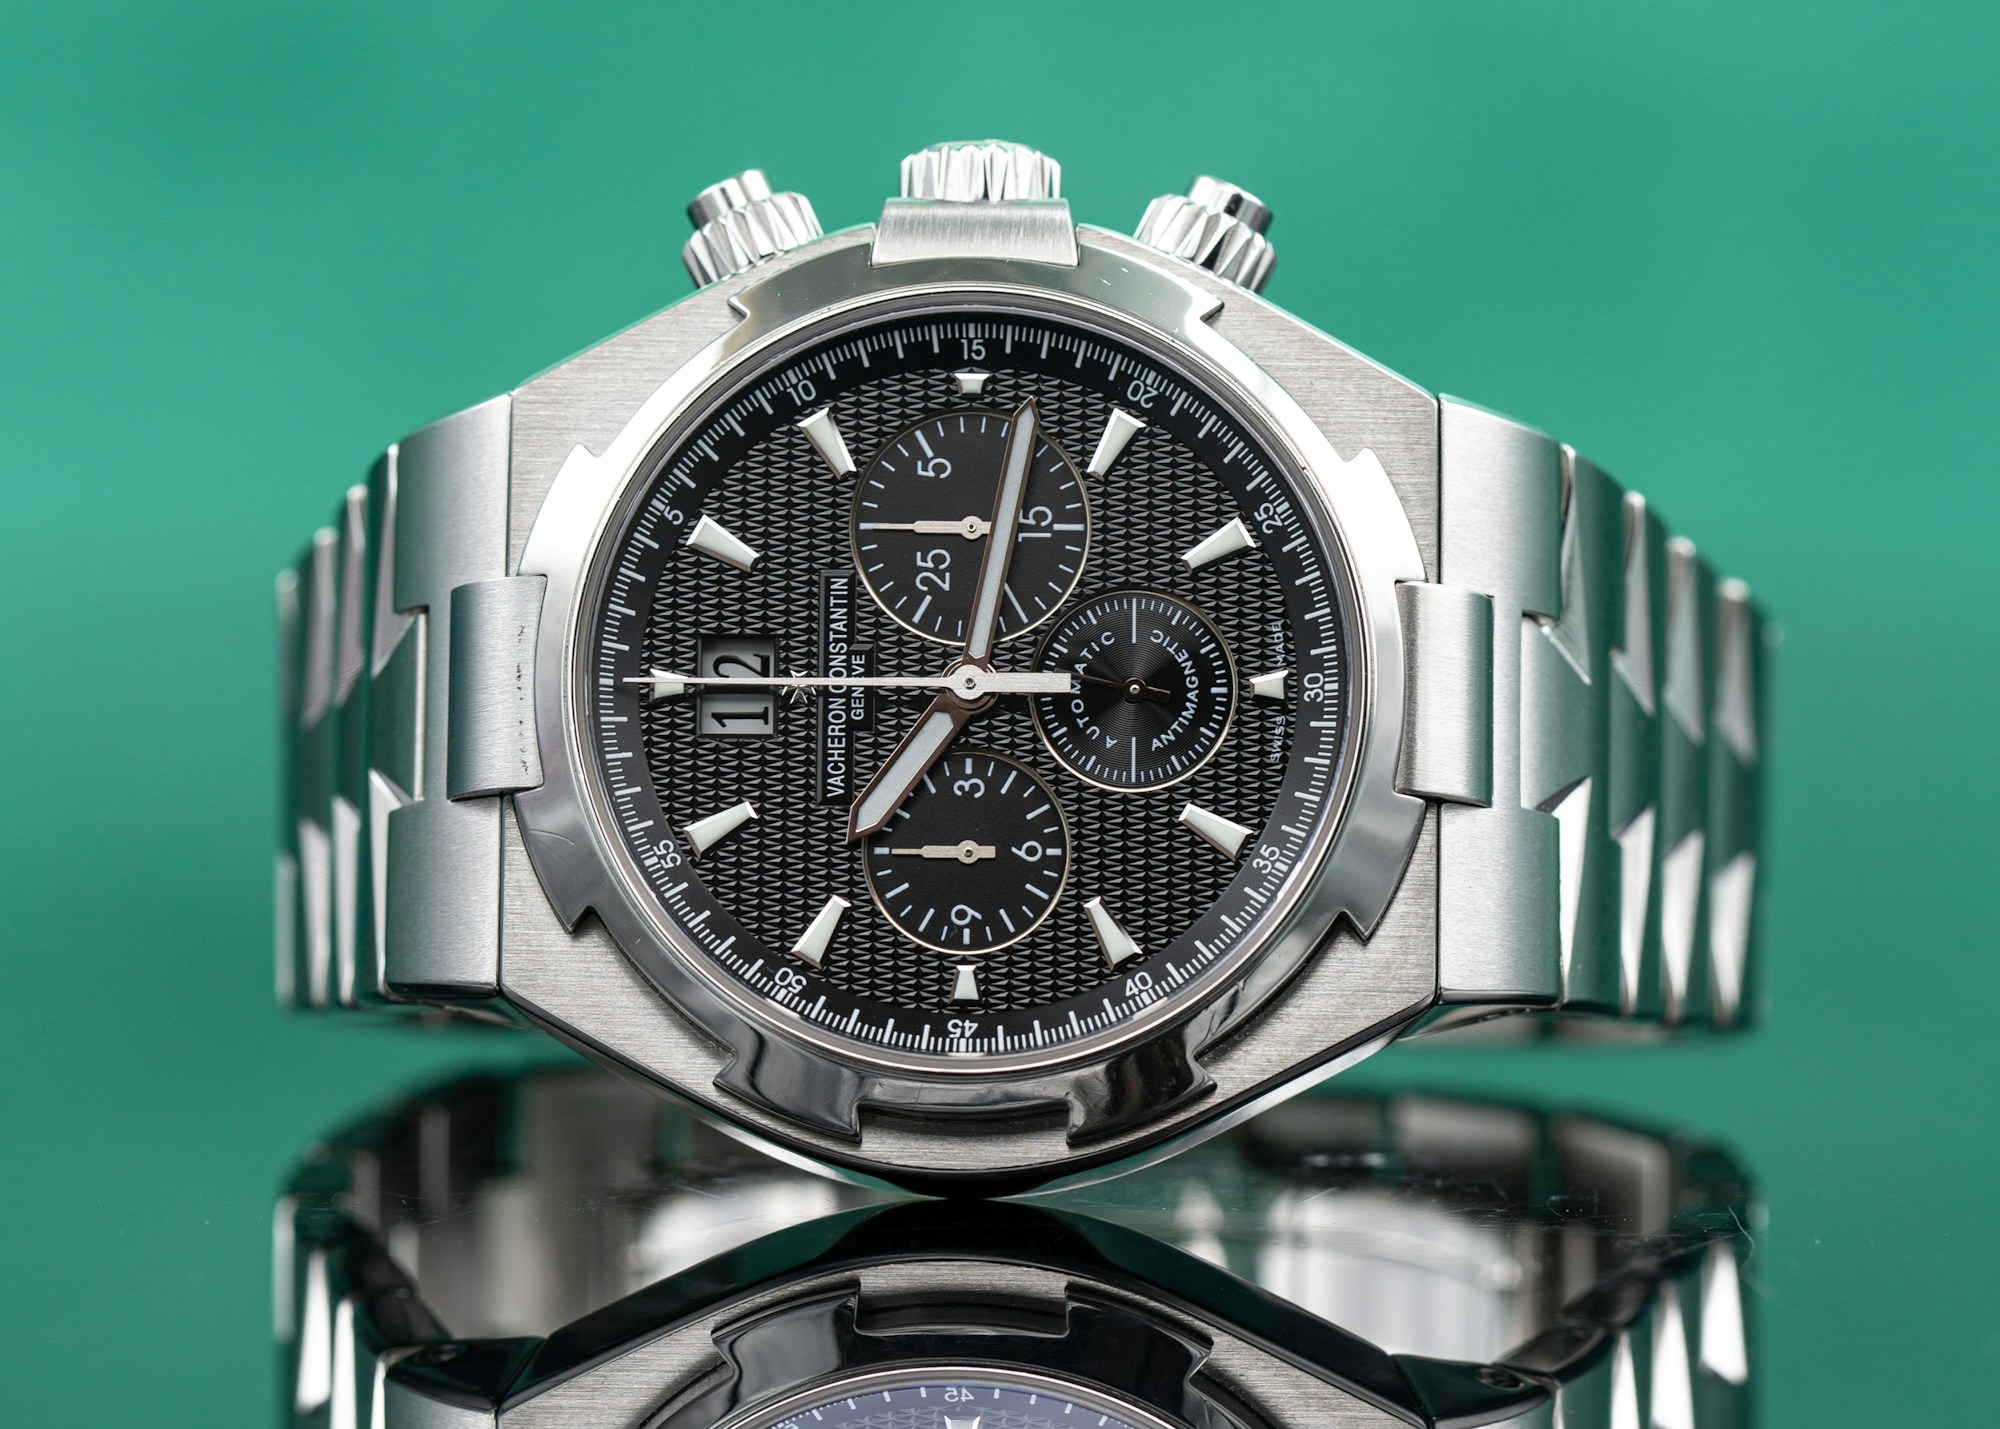 Vacheron Constantin Overseas Chronograph for $36,500 for sale from